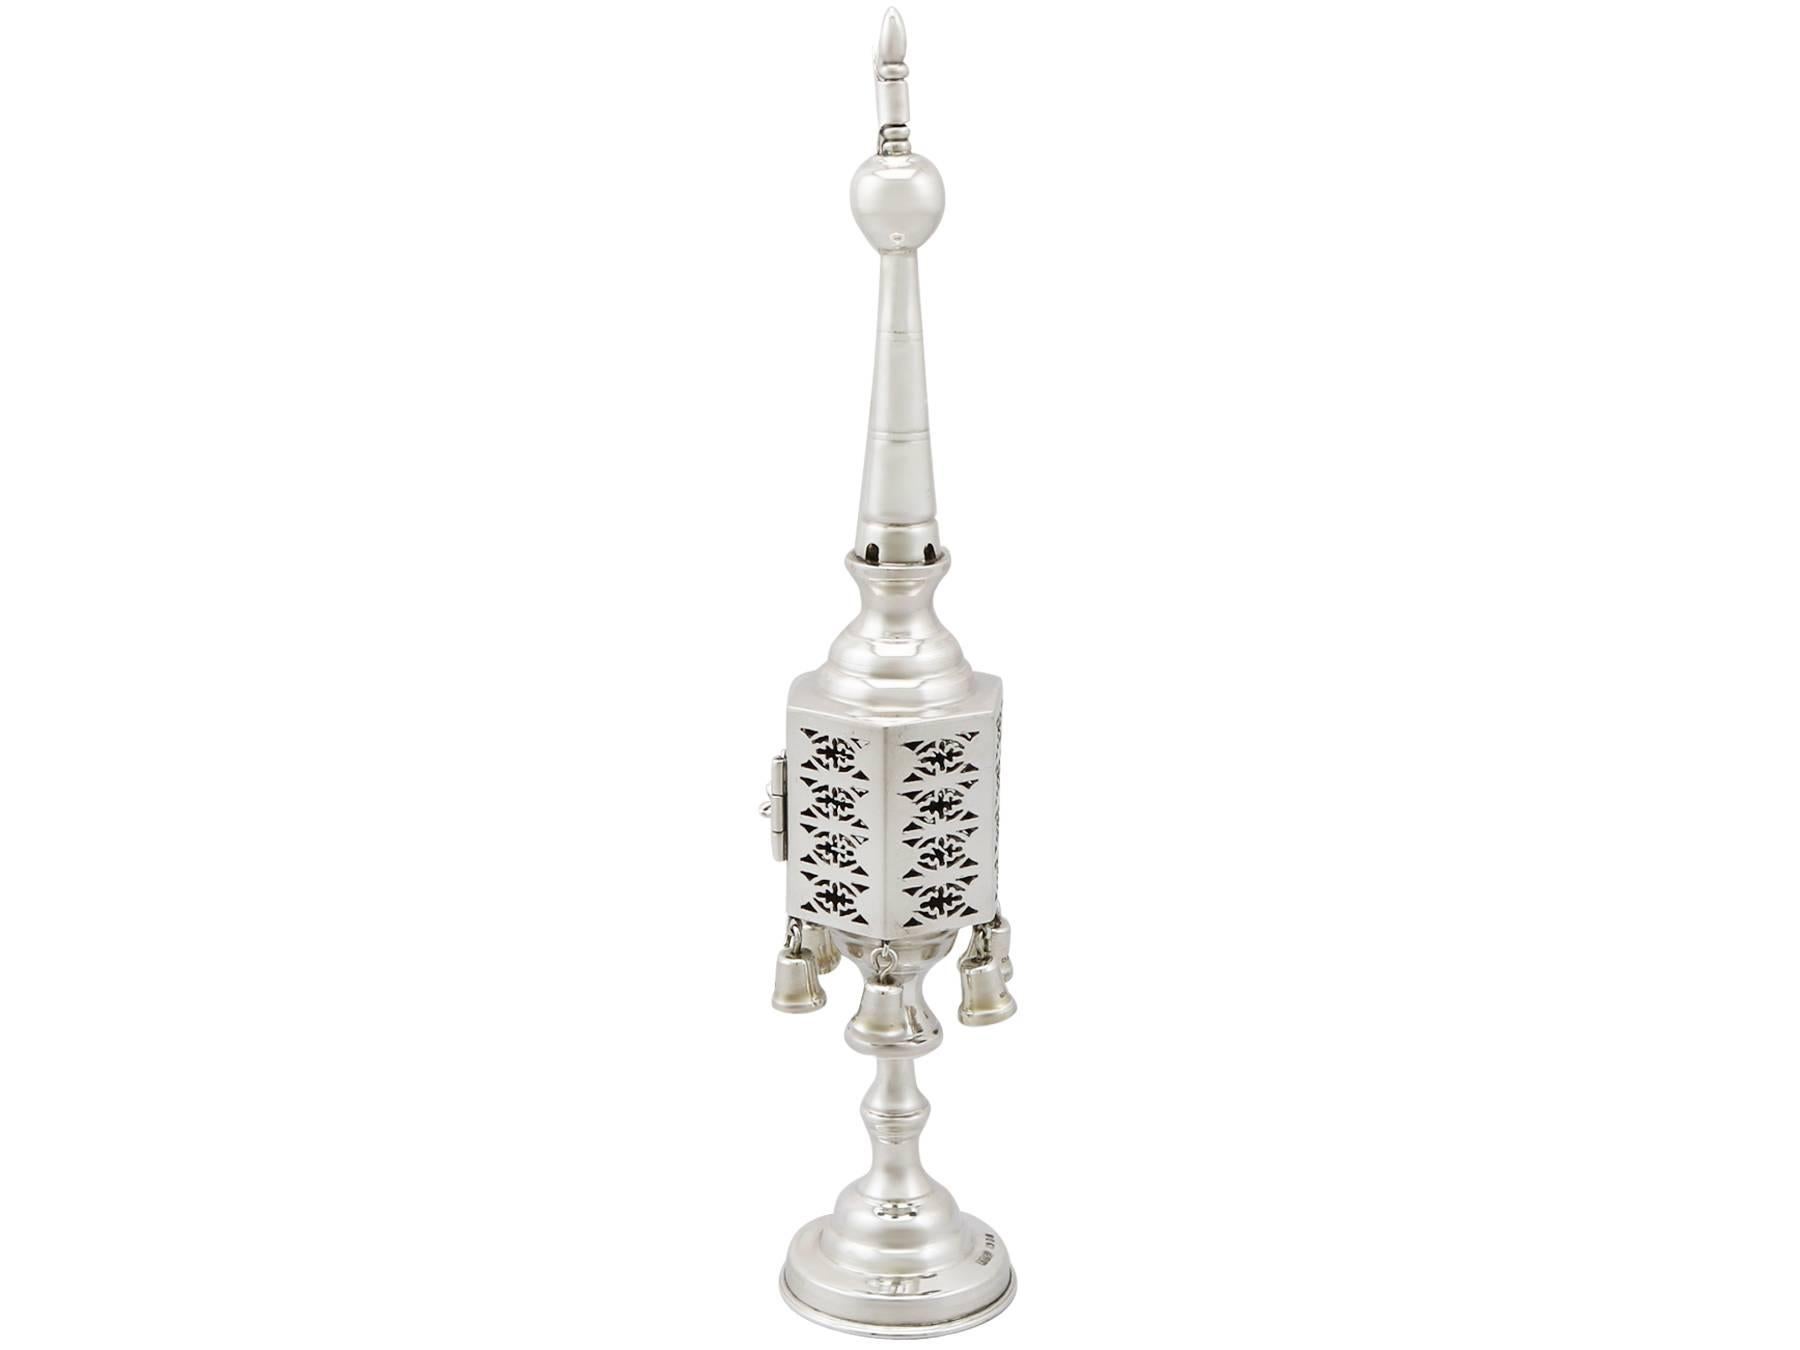 An exceptional, fine and impressive vintage Elizabeth II English sterling silver spice tower, an addition to our silver Judaica collection.

This exceptional vintage sterling silver spice box has been modelled in the form of a tower.

The